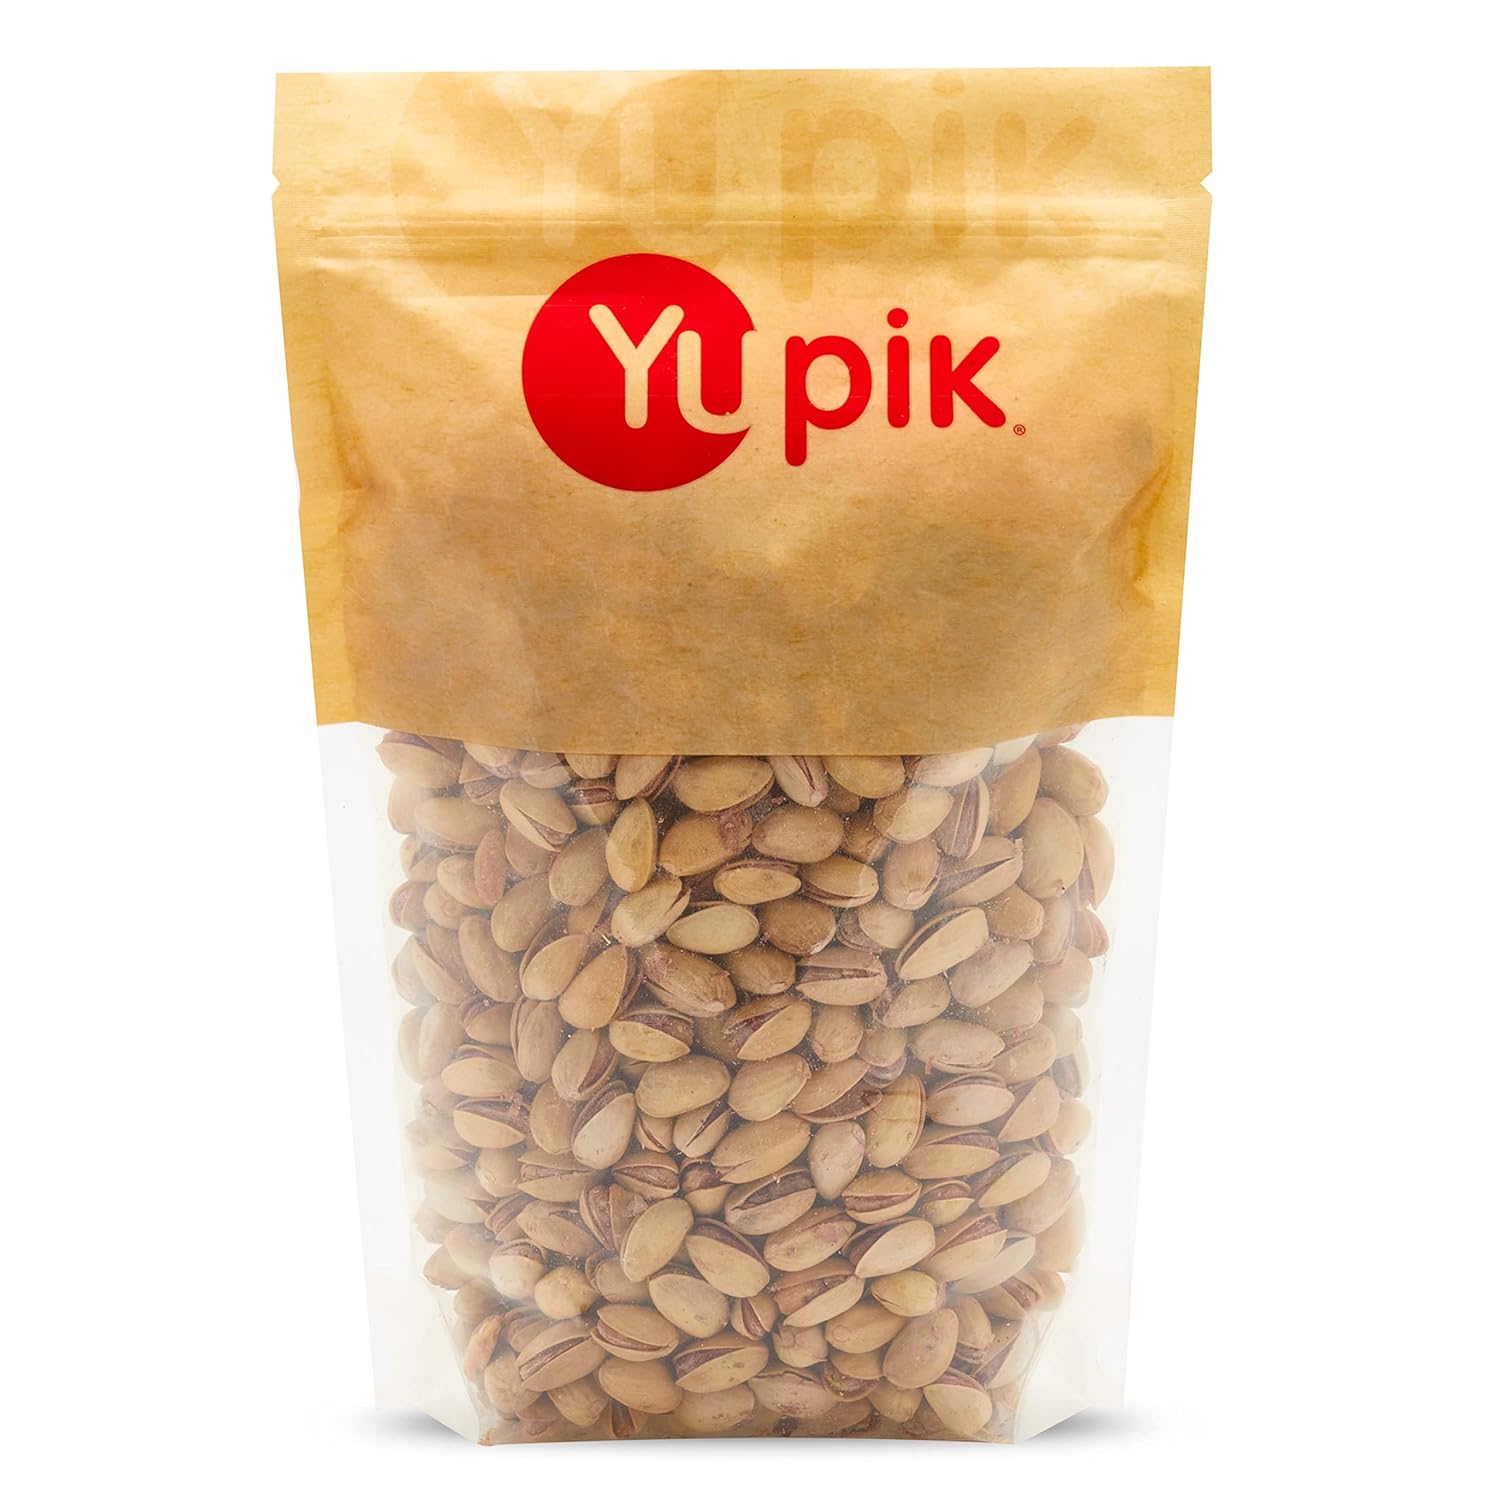 Yupik Nuts California Roasted & Salted Pistachios, 2.2 lb, Pack of 1